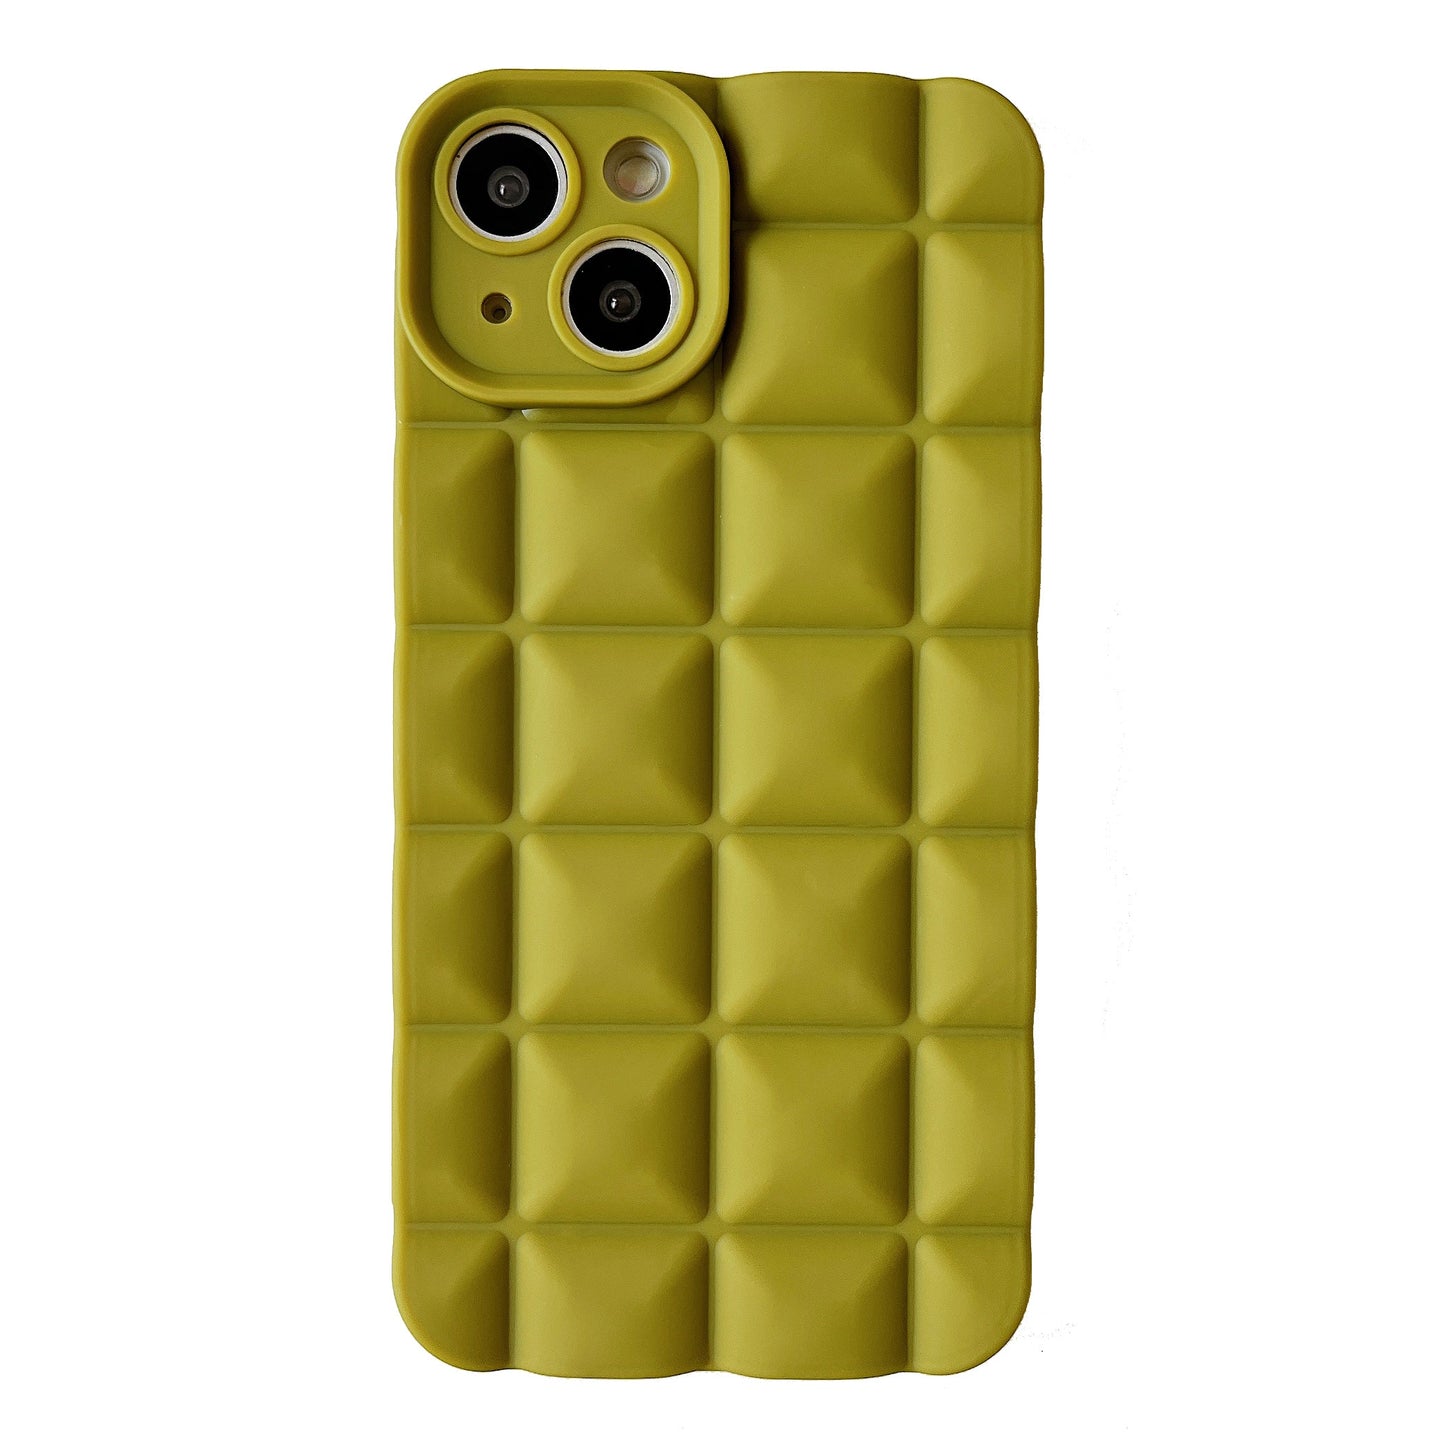 Checkered Grid Lattice Soft Compatible with iPhone Case